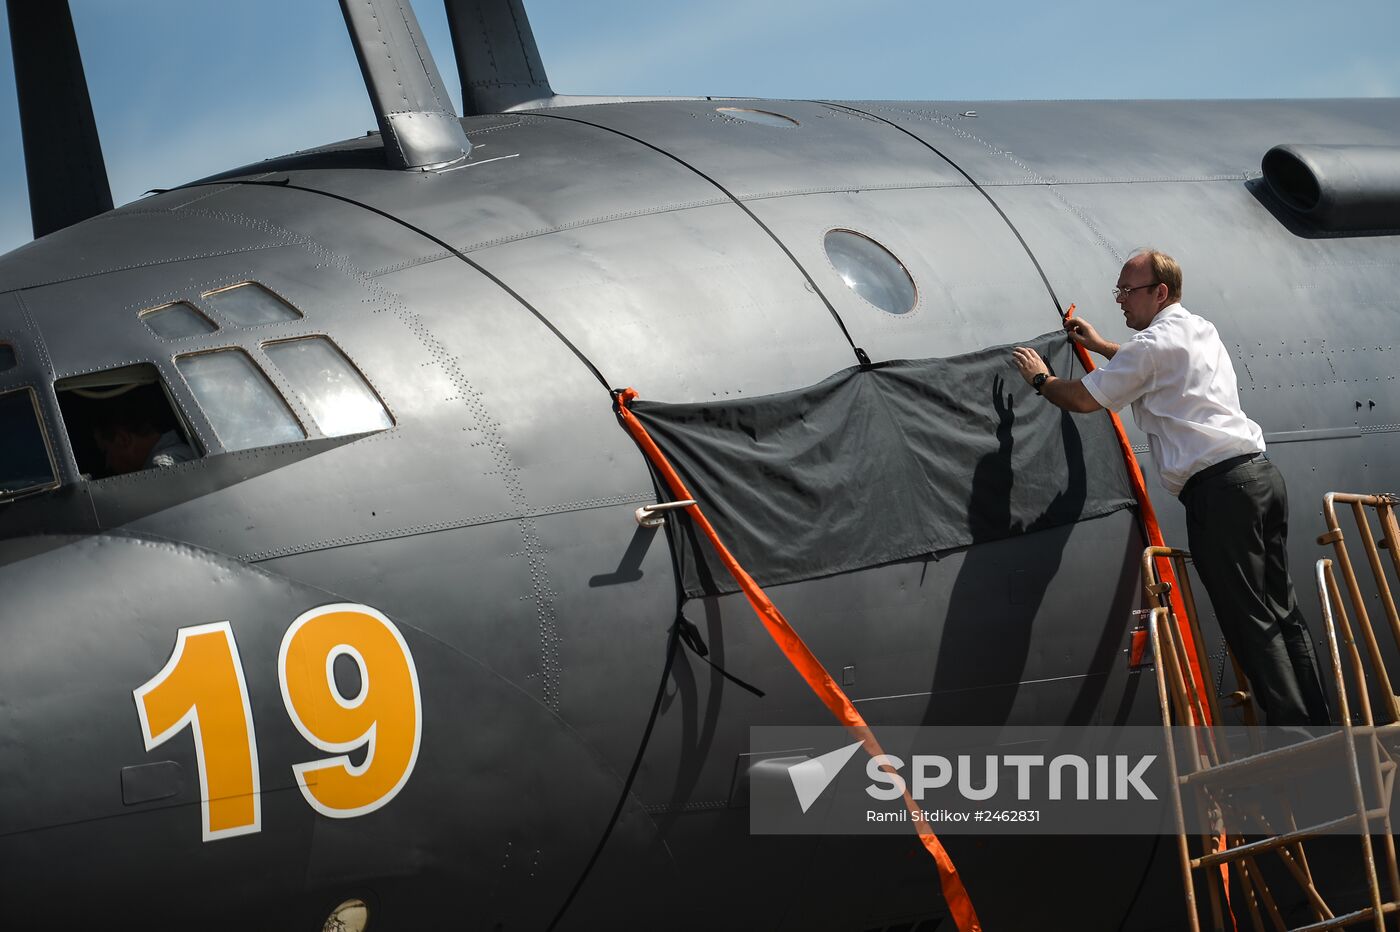 Transfer of Russian navy's Il-38N antisubmarine aircraft